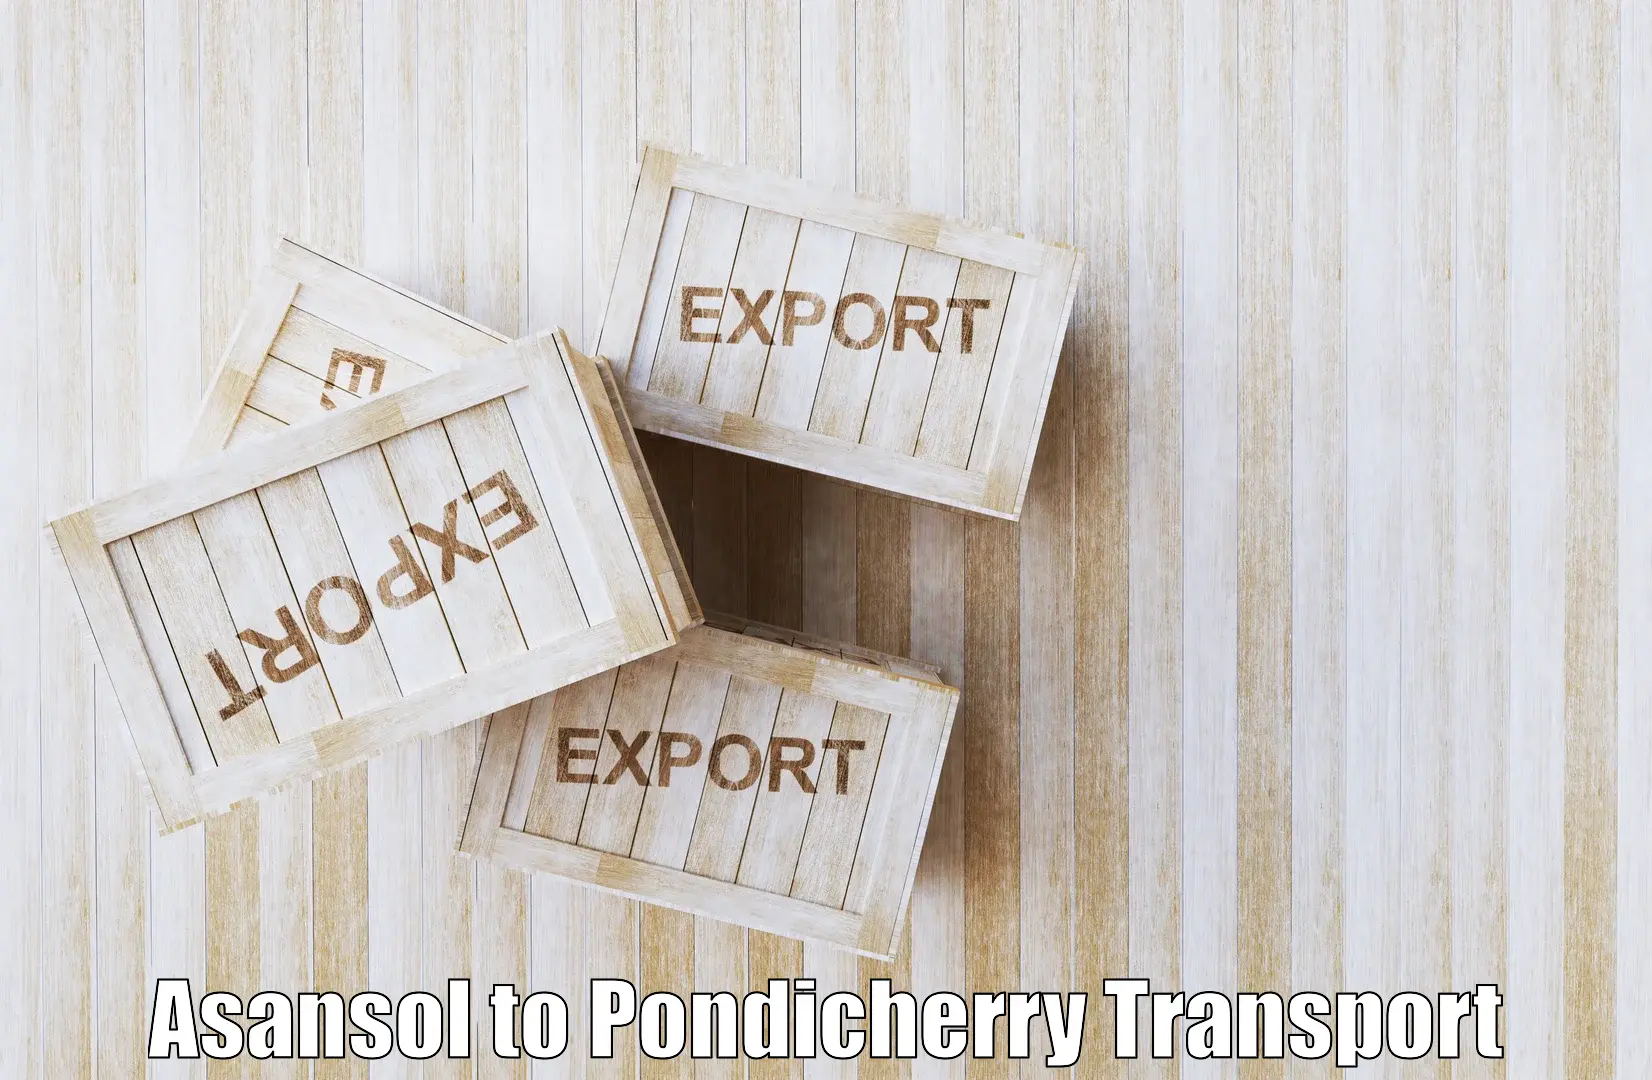 Goods delivery service Asansol to Pondicherry